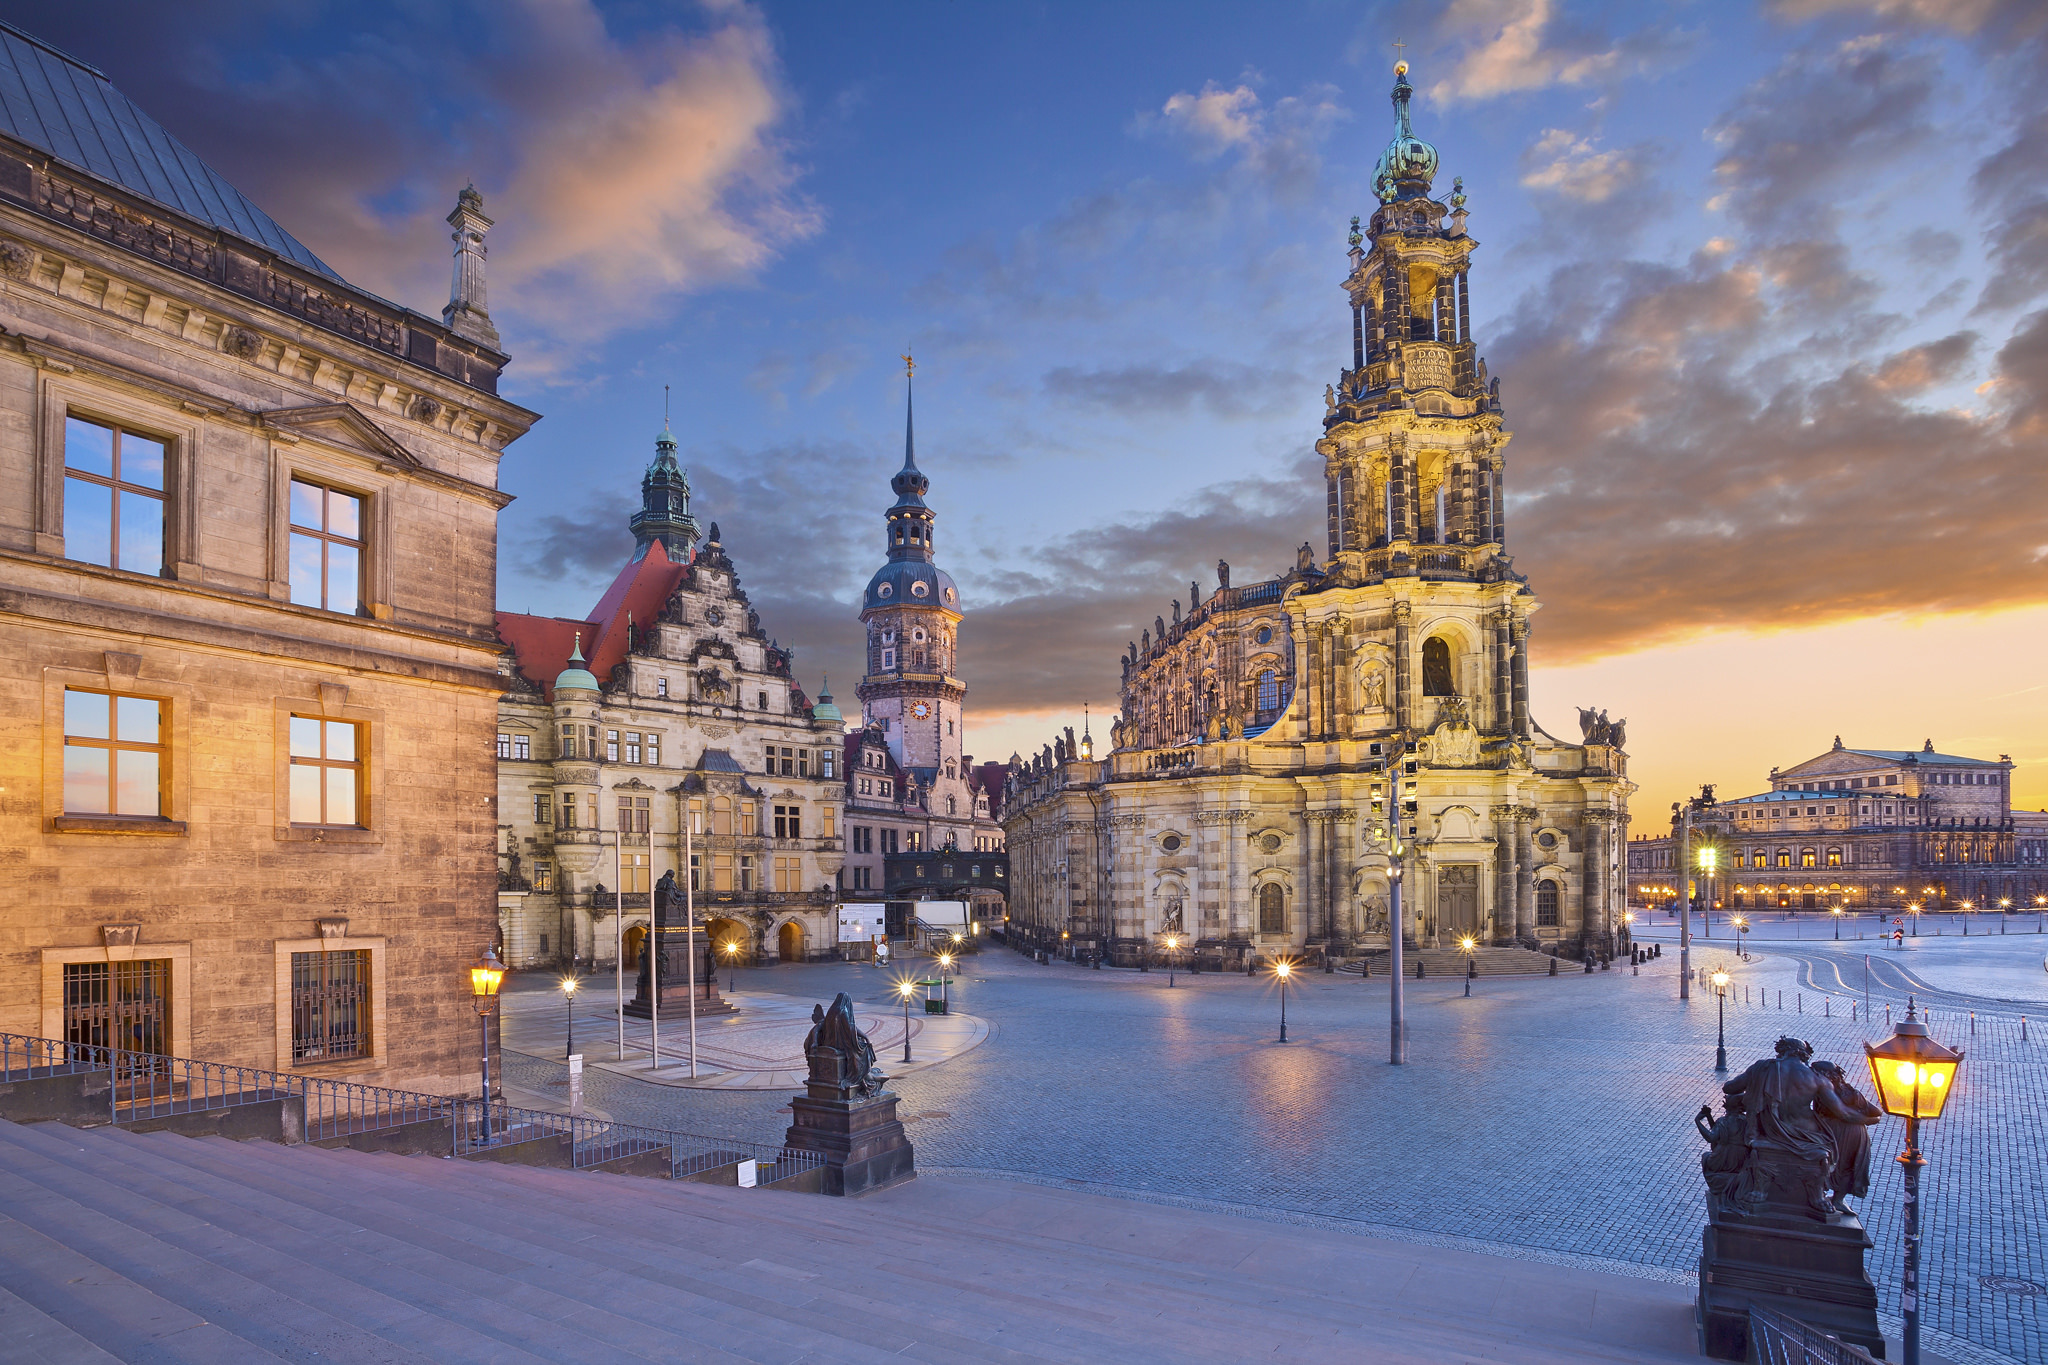 germany, man made, dresden, architecture, light, night, sky, theater, cities 2160p